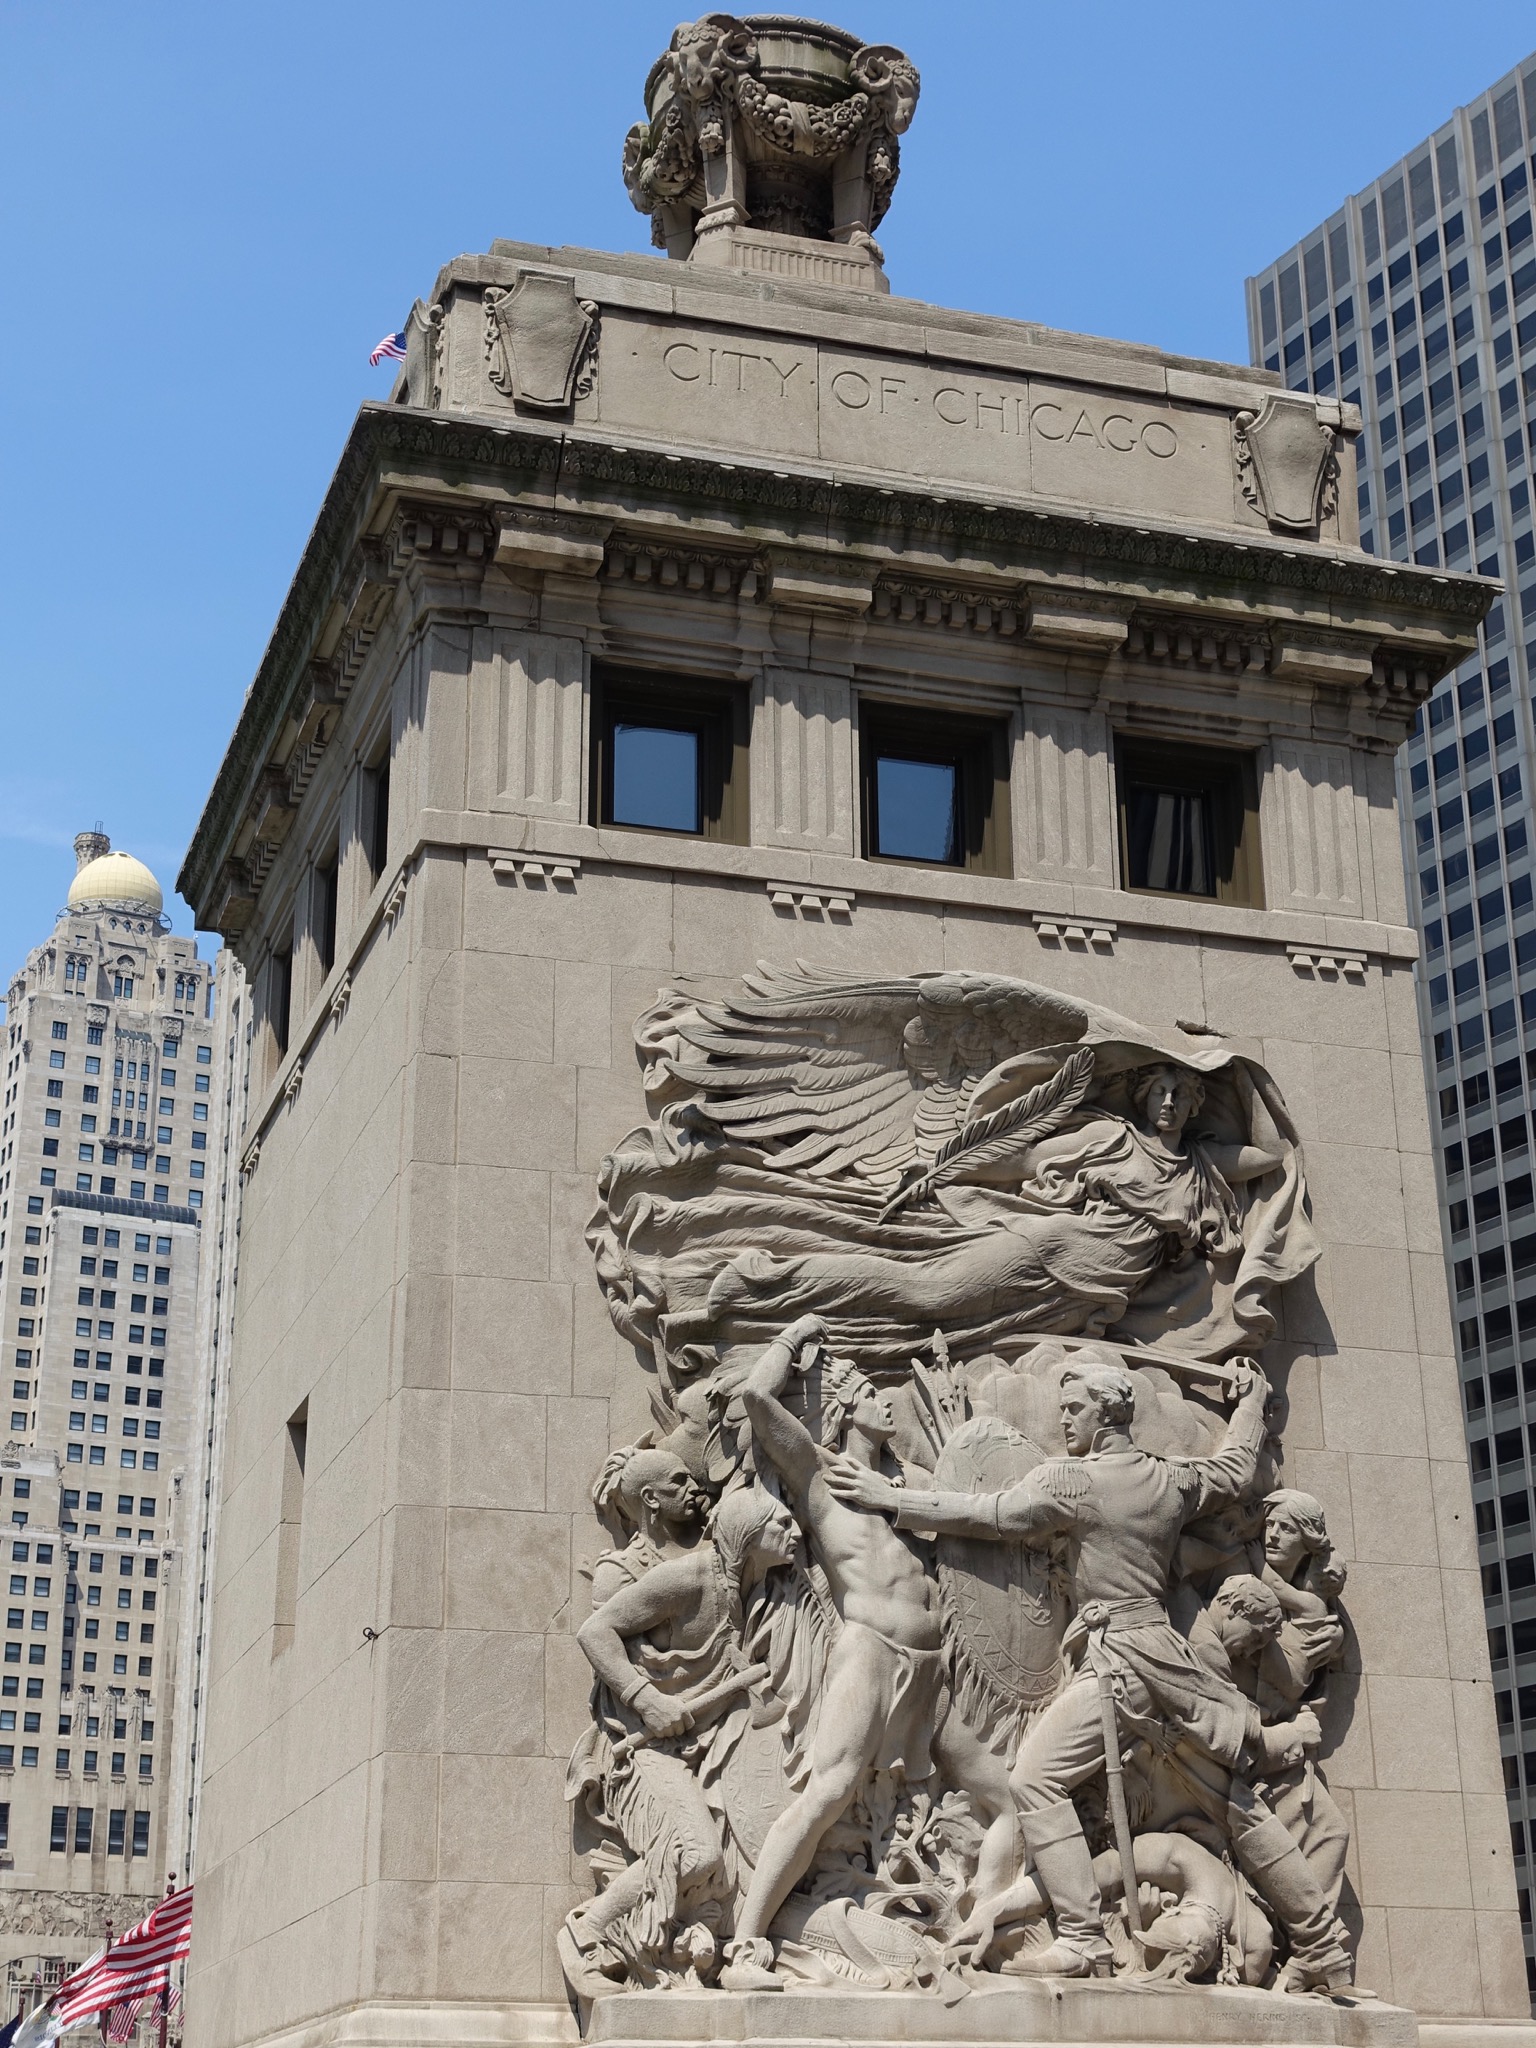 Photo 27 of 135 from the album Highlights Chicago 2015.